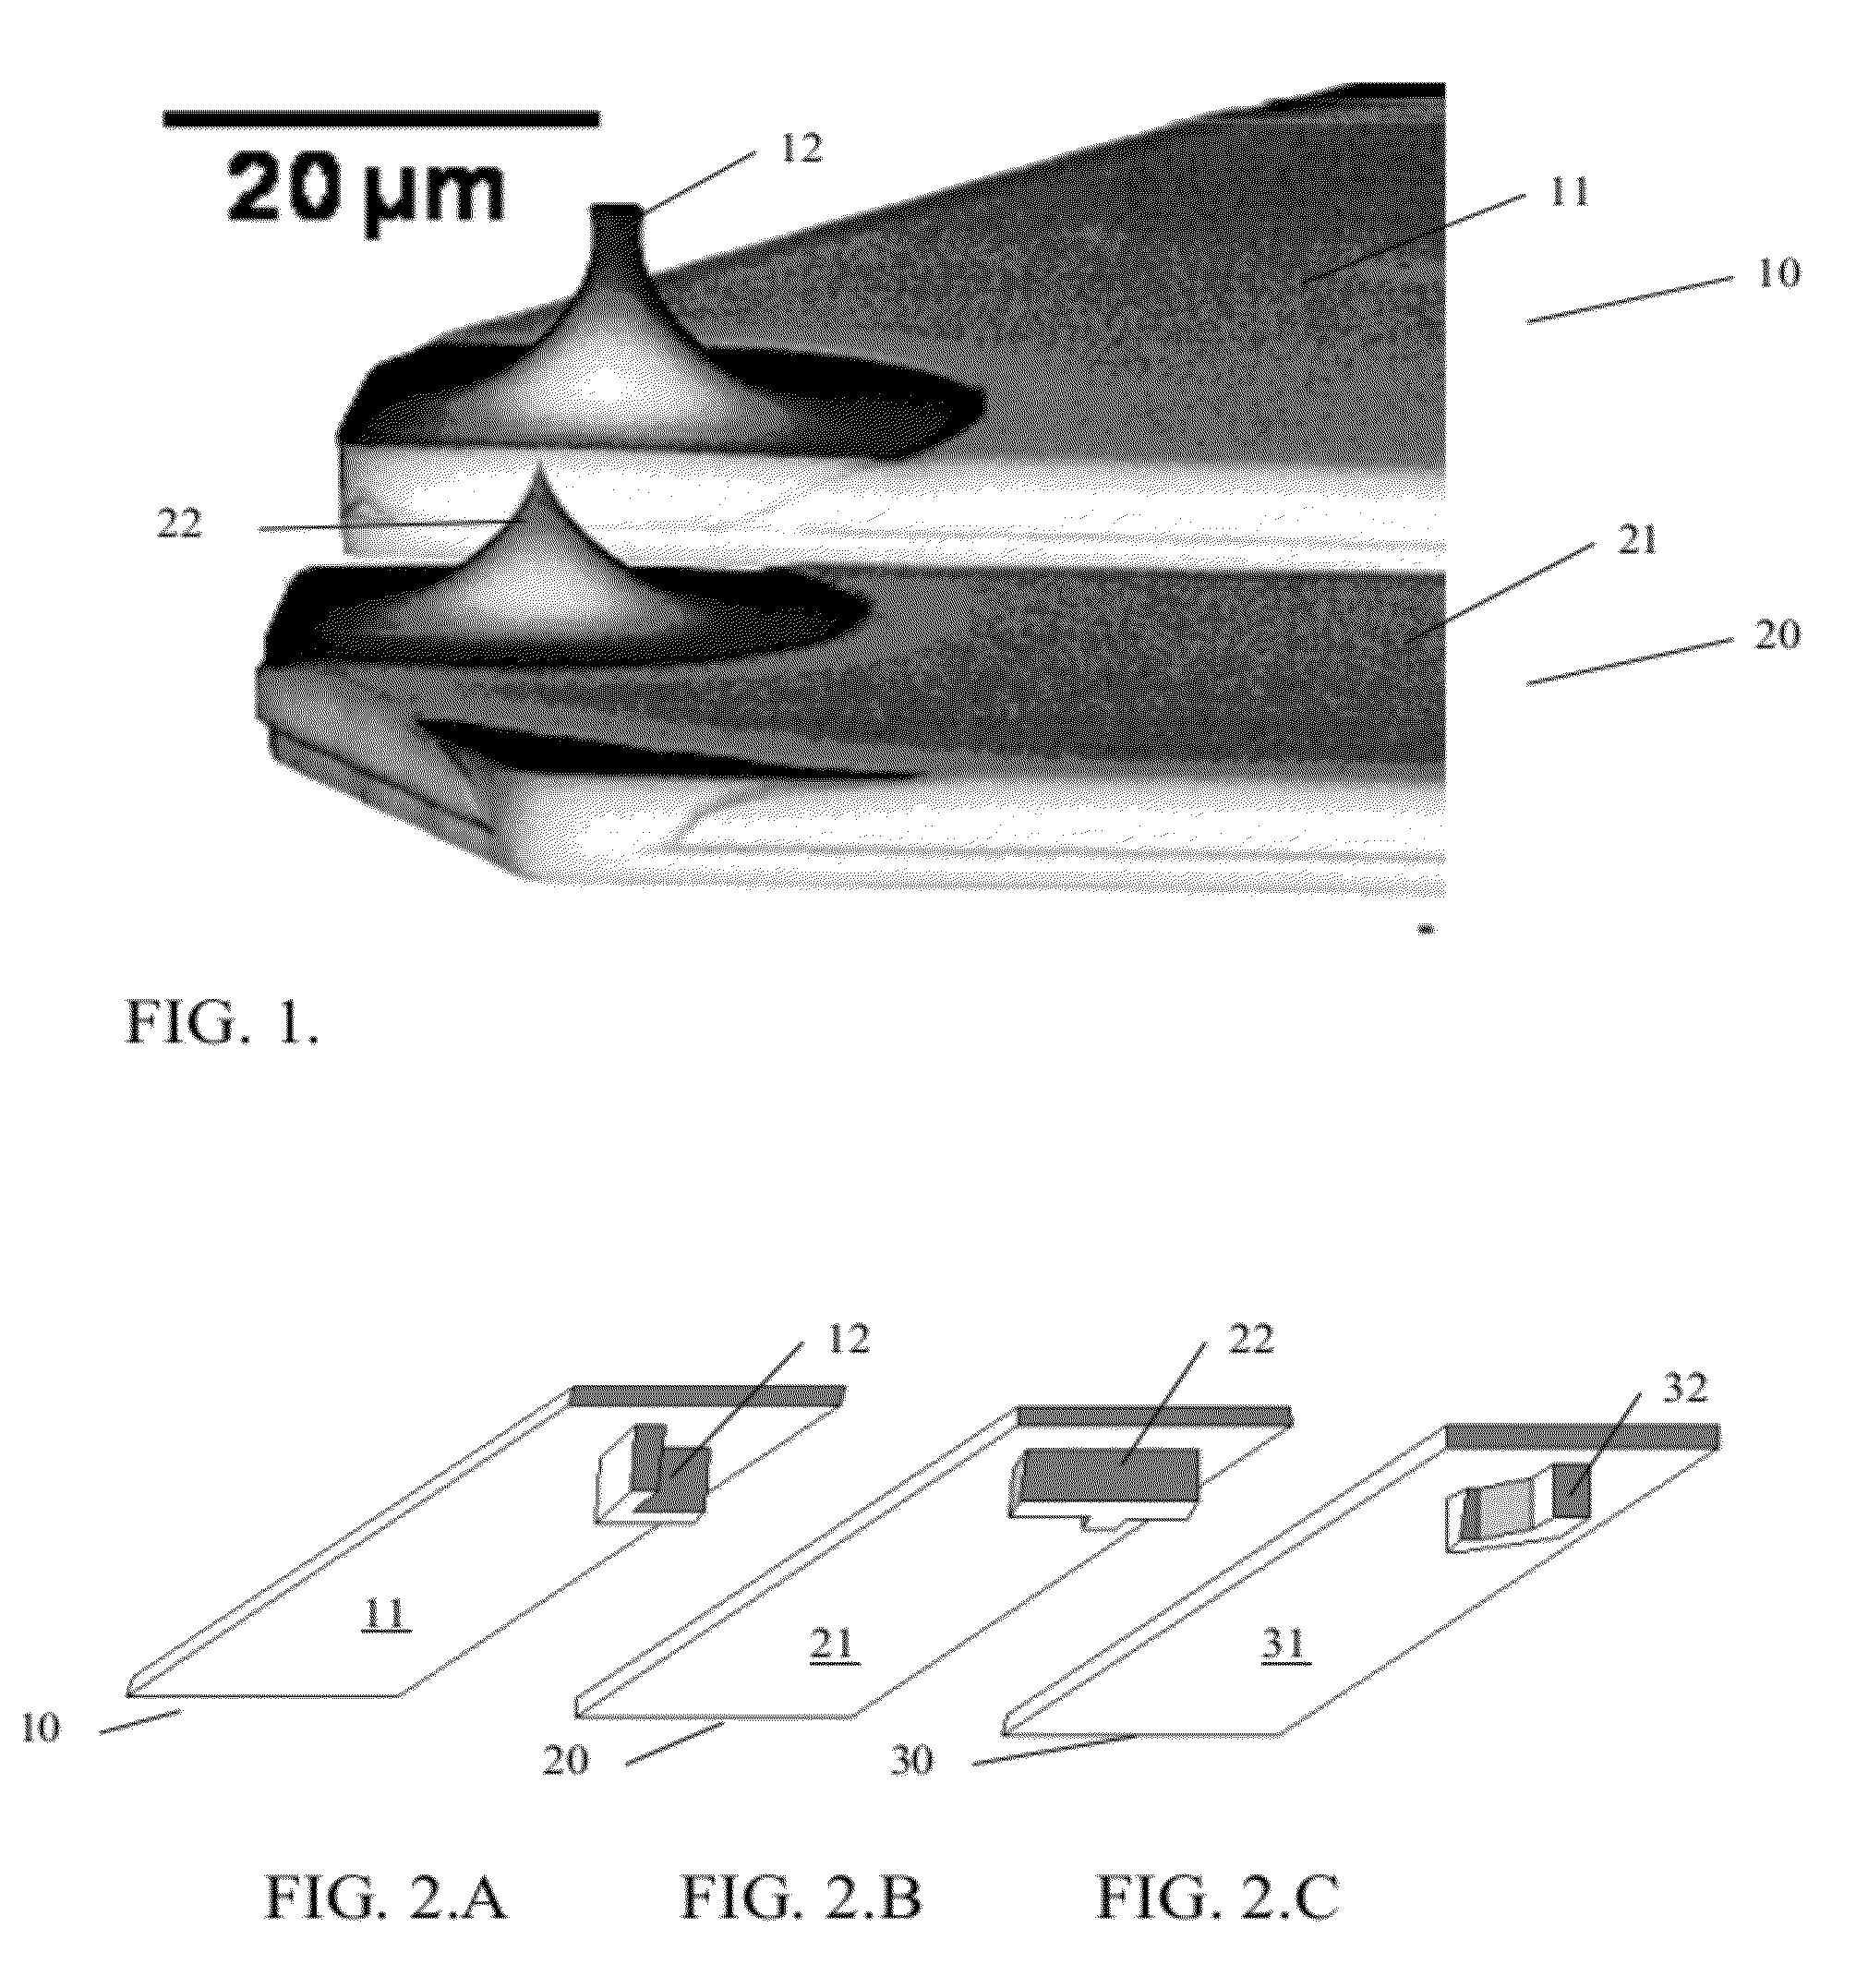 Scanning probe lithography apparatus and method, and material accordingly obtained